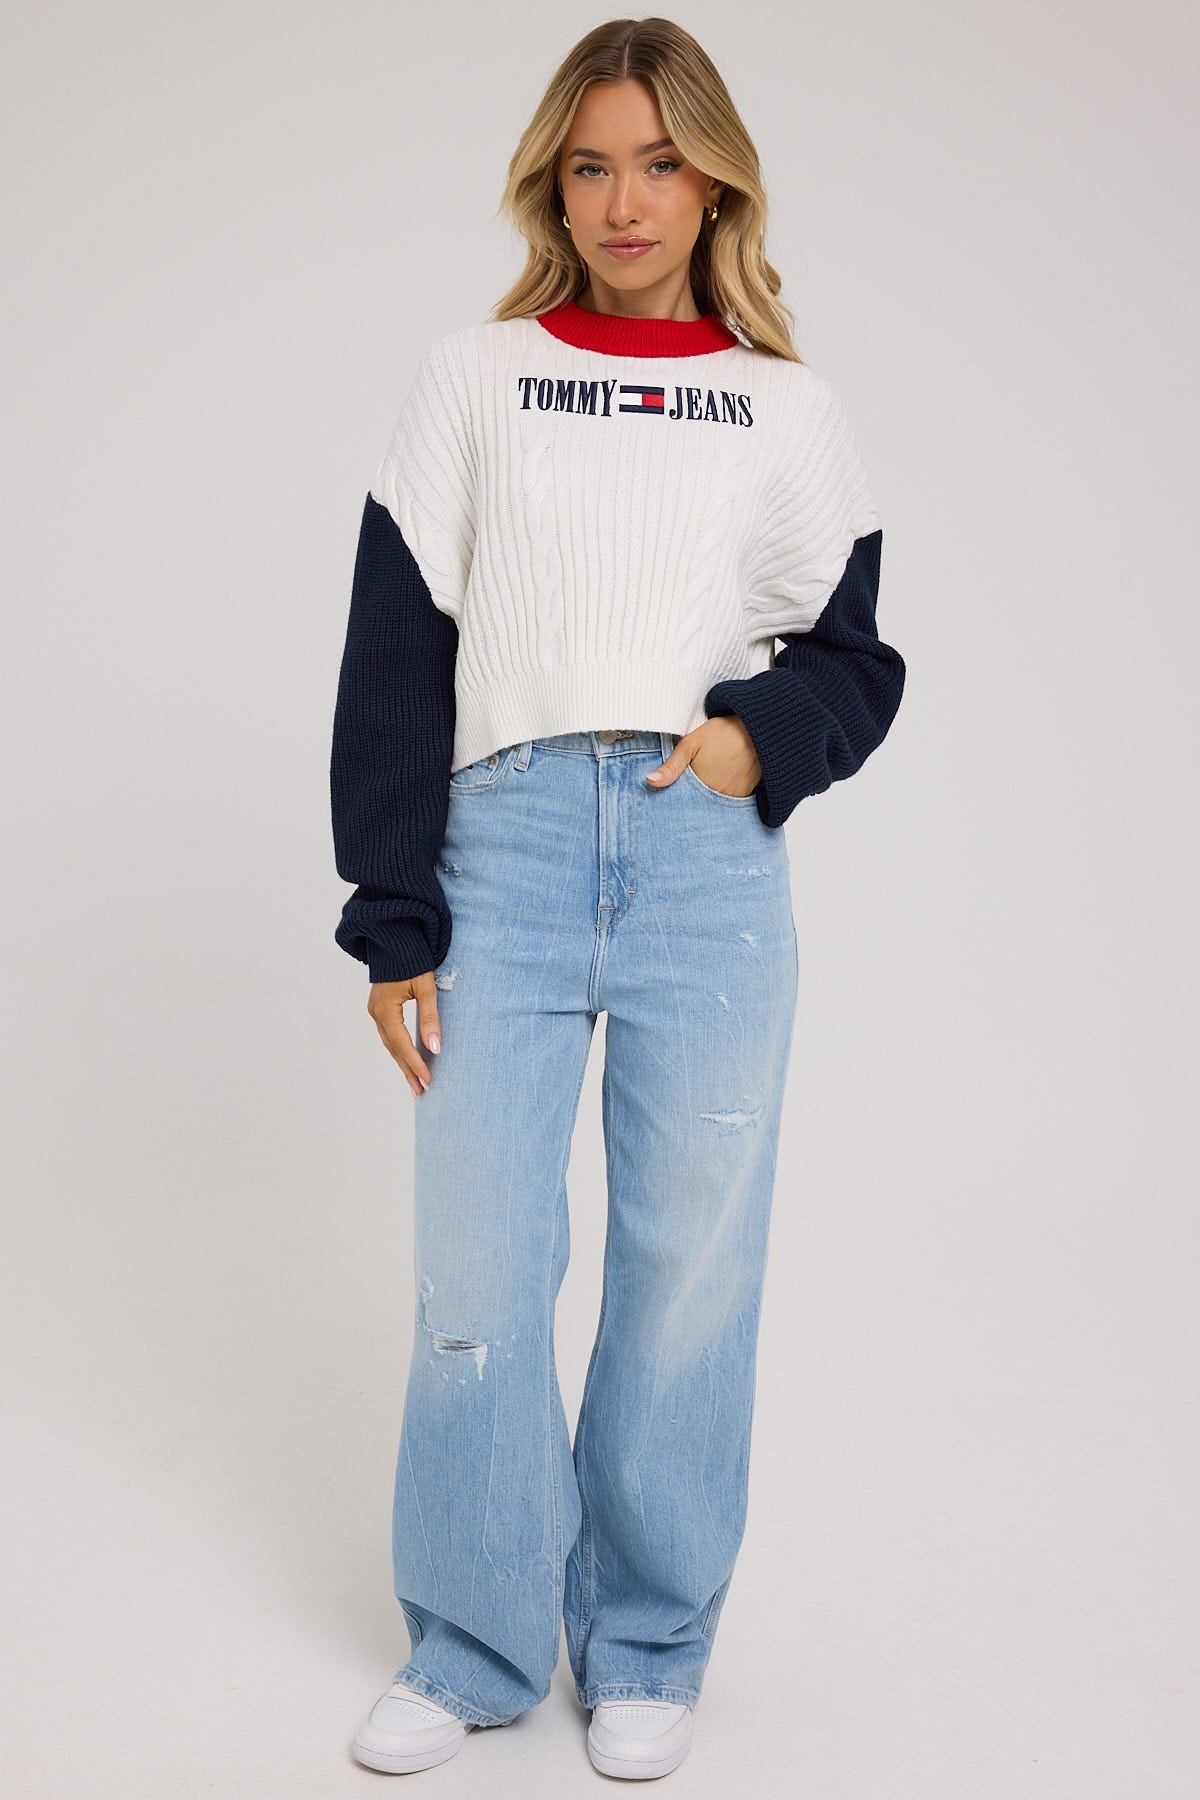 Tommy Jeans Archive Sweater Ancient White